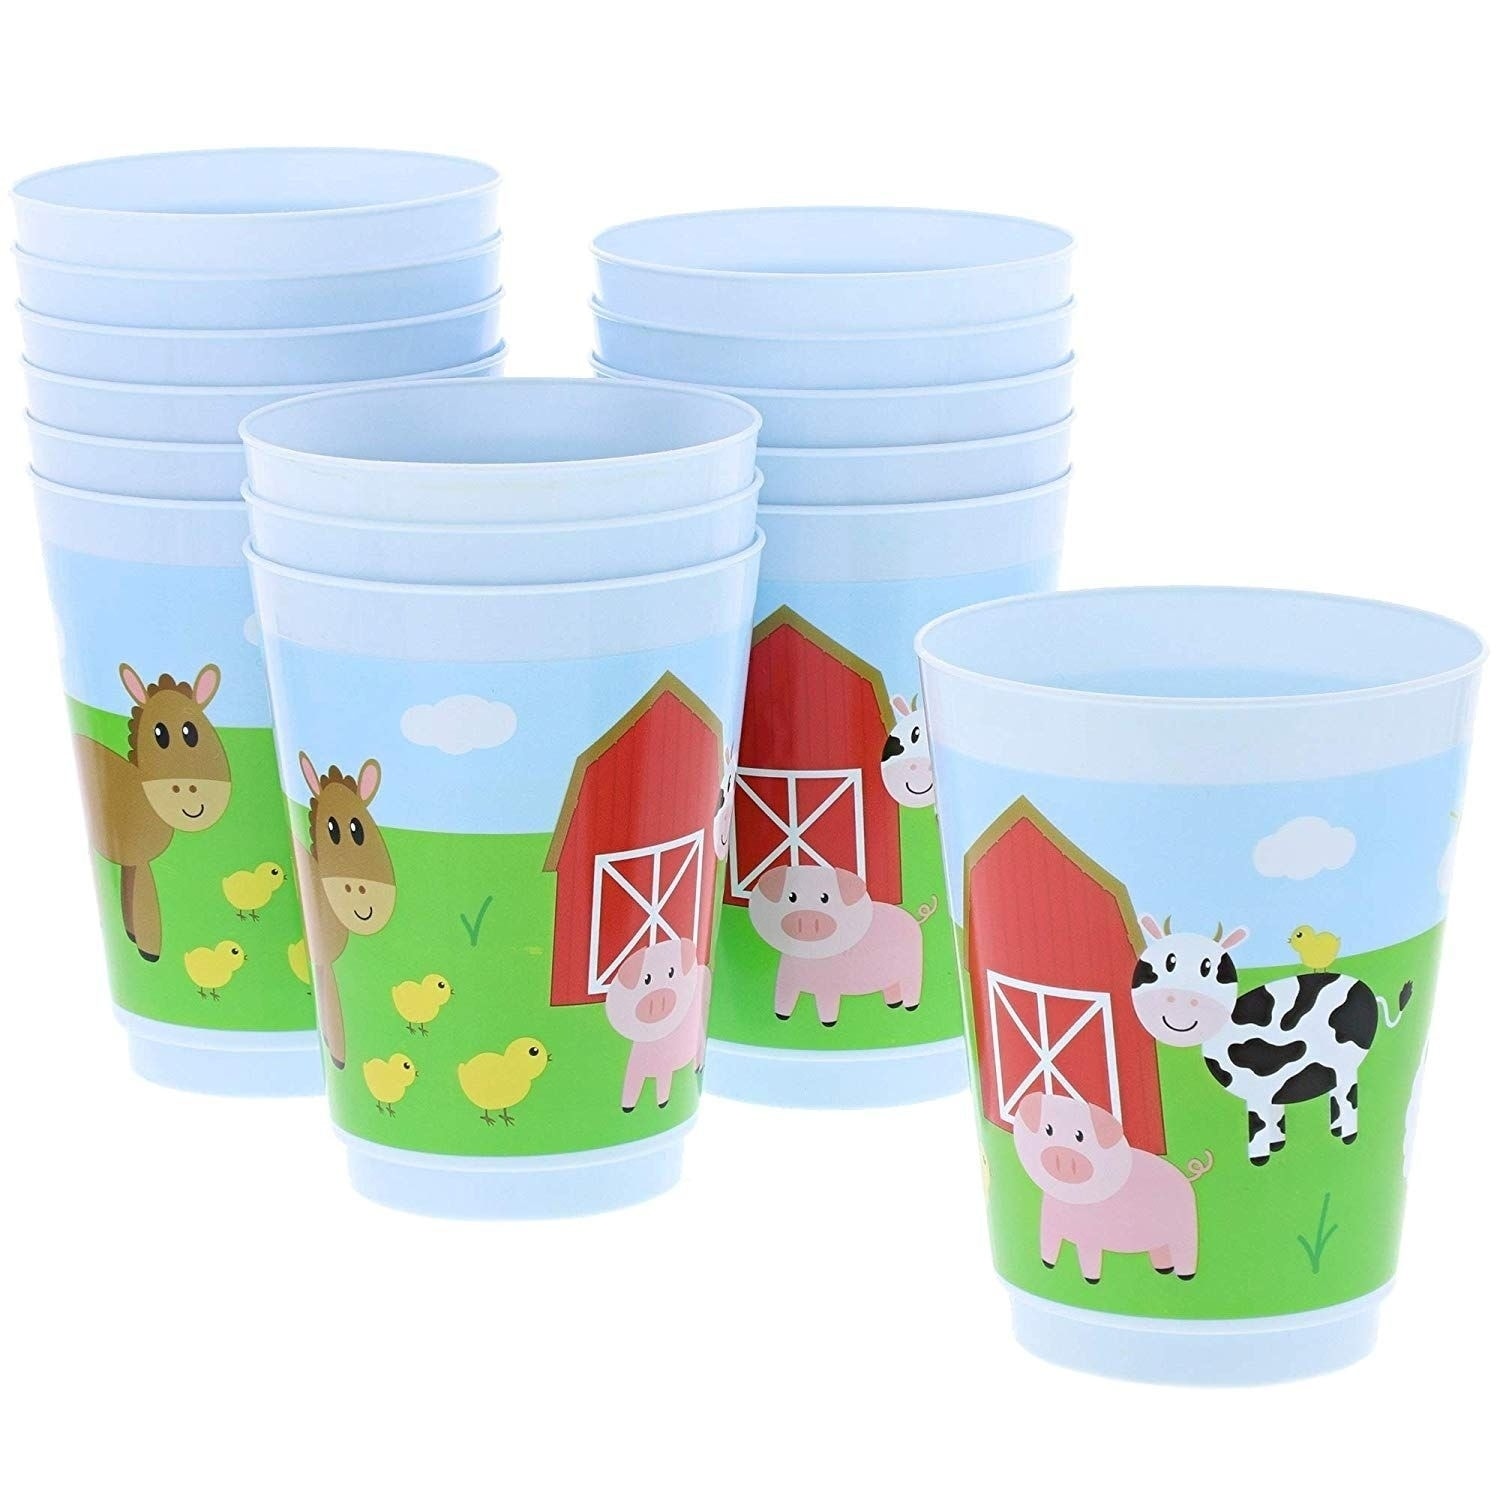 https://ak1.ostkcdn.com/images/products/31094317/16-Pack-Plastic-16-oz-Party-Cups-Farm-Animal-Reusable-Tumblers-for-Kids-Birthday-Parties-e5b280f1-6510-4d6a-8d98-6237f92aff21.jpg